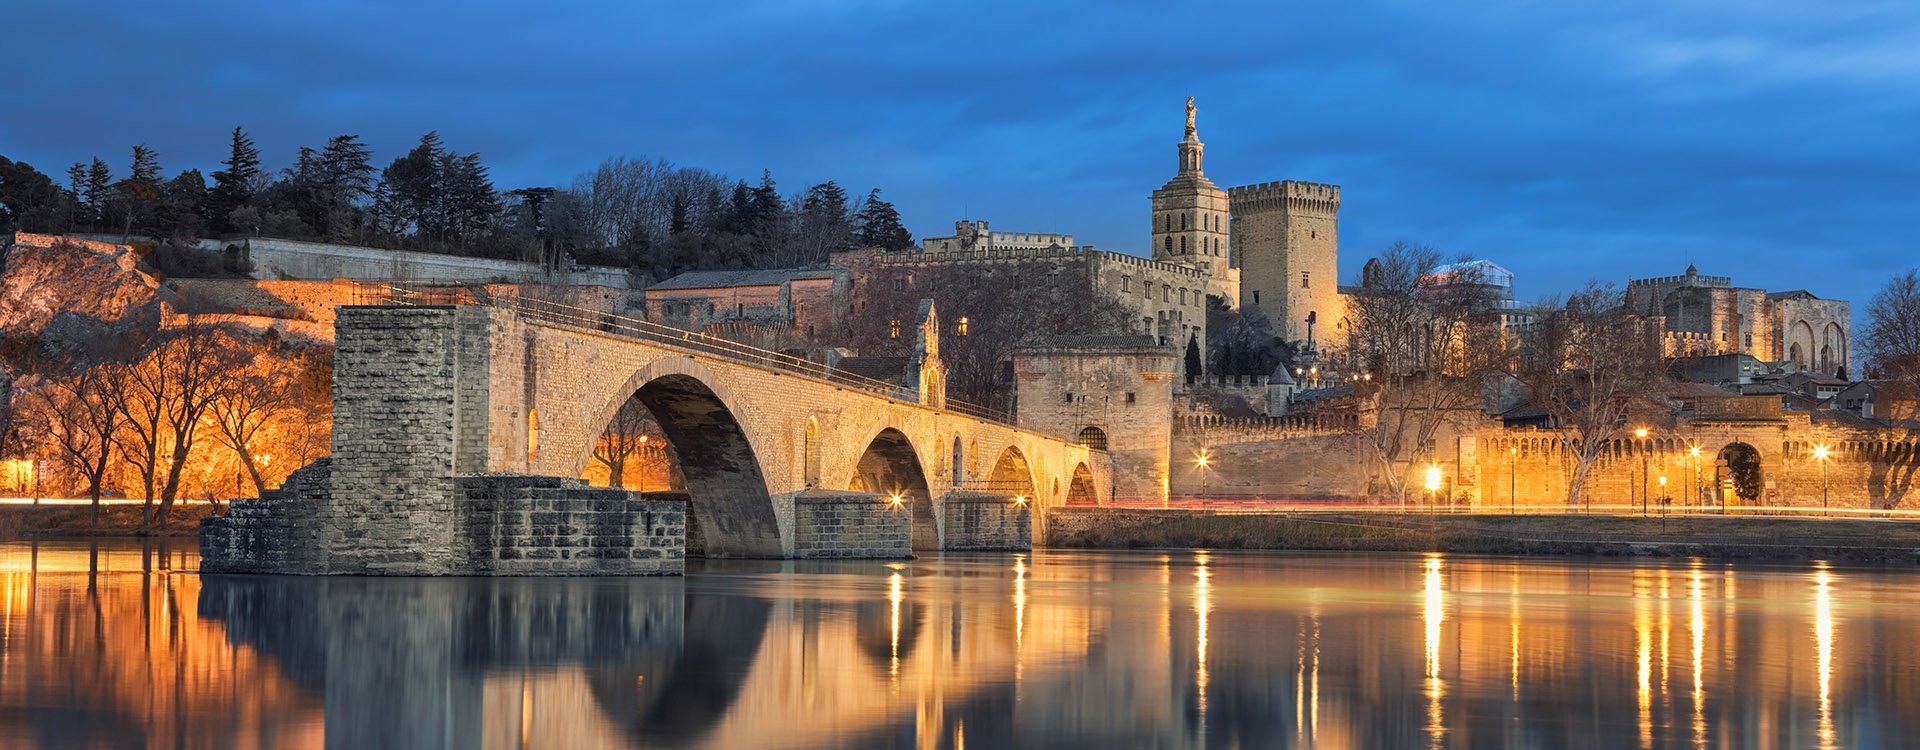 View on Pont d'Avignon 12th century bridge and city skyline reflecting in water at dusk in Avignon, Provence, France